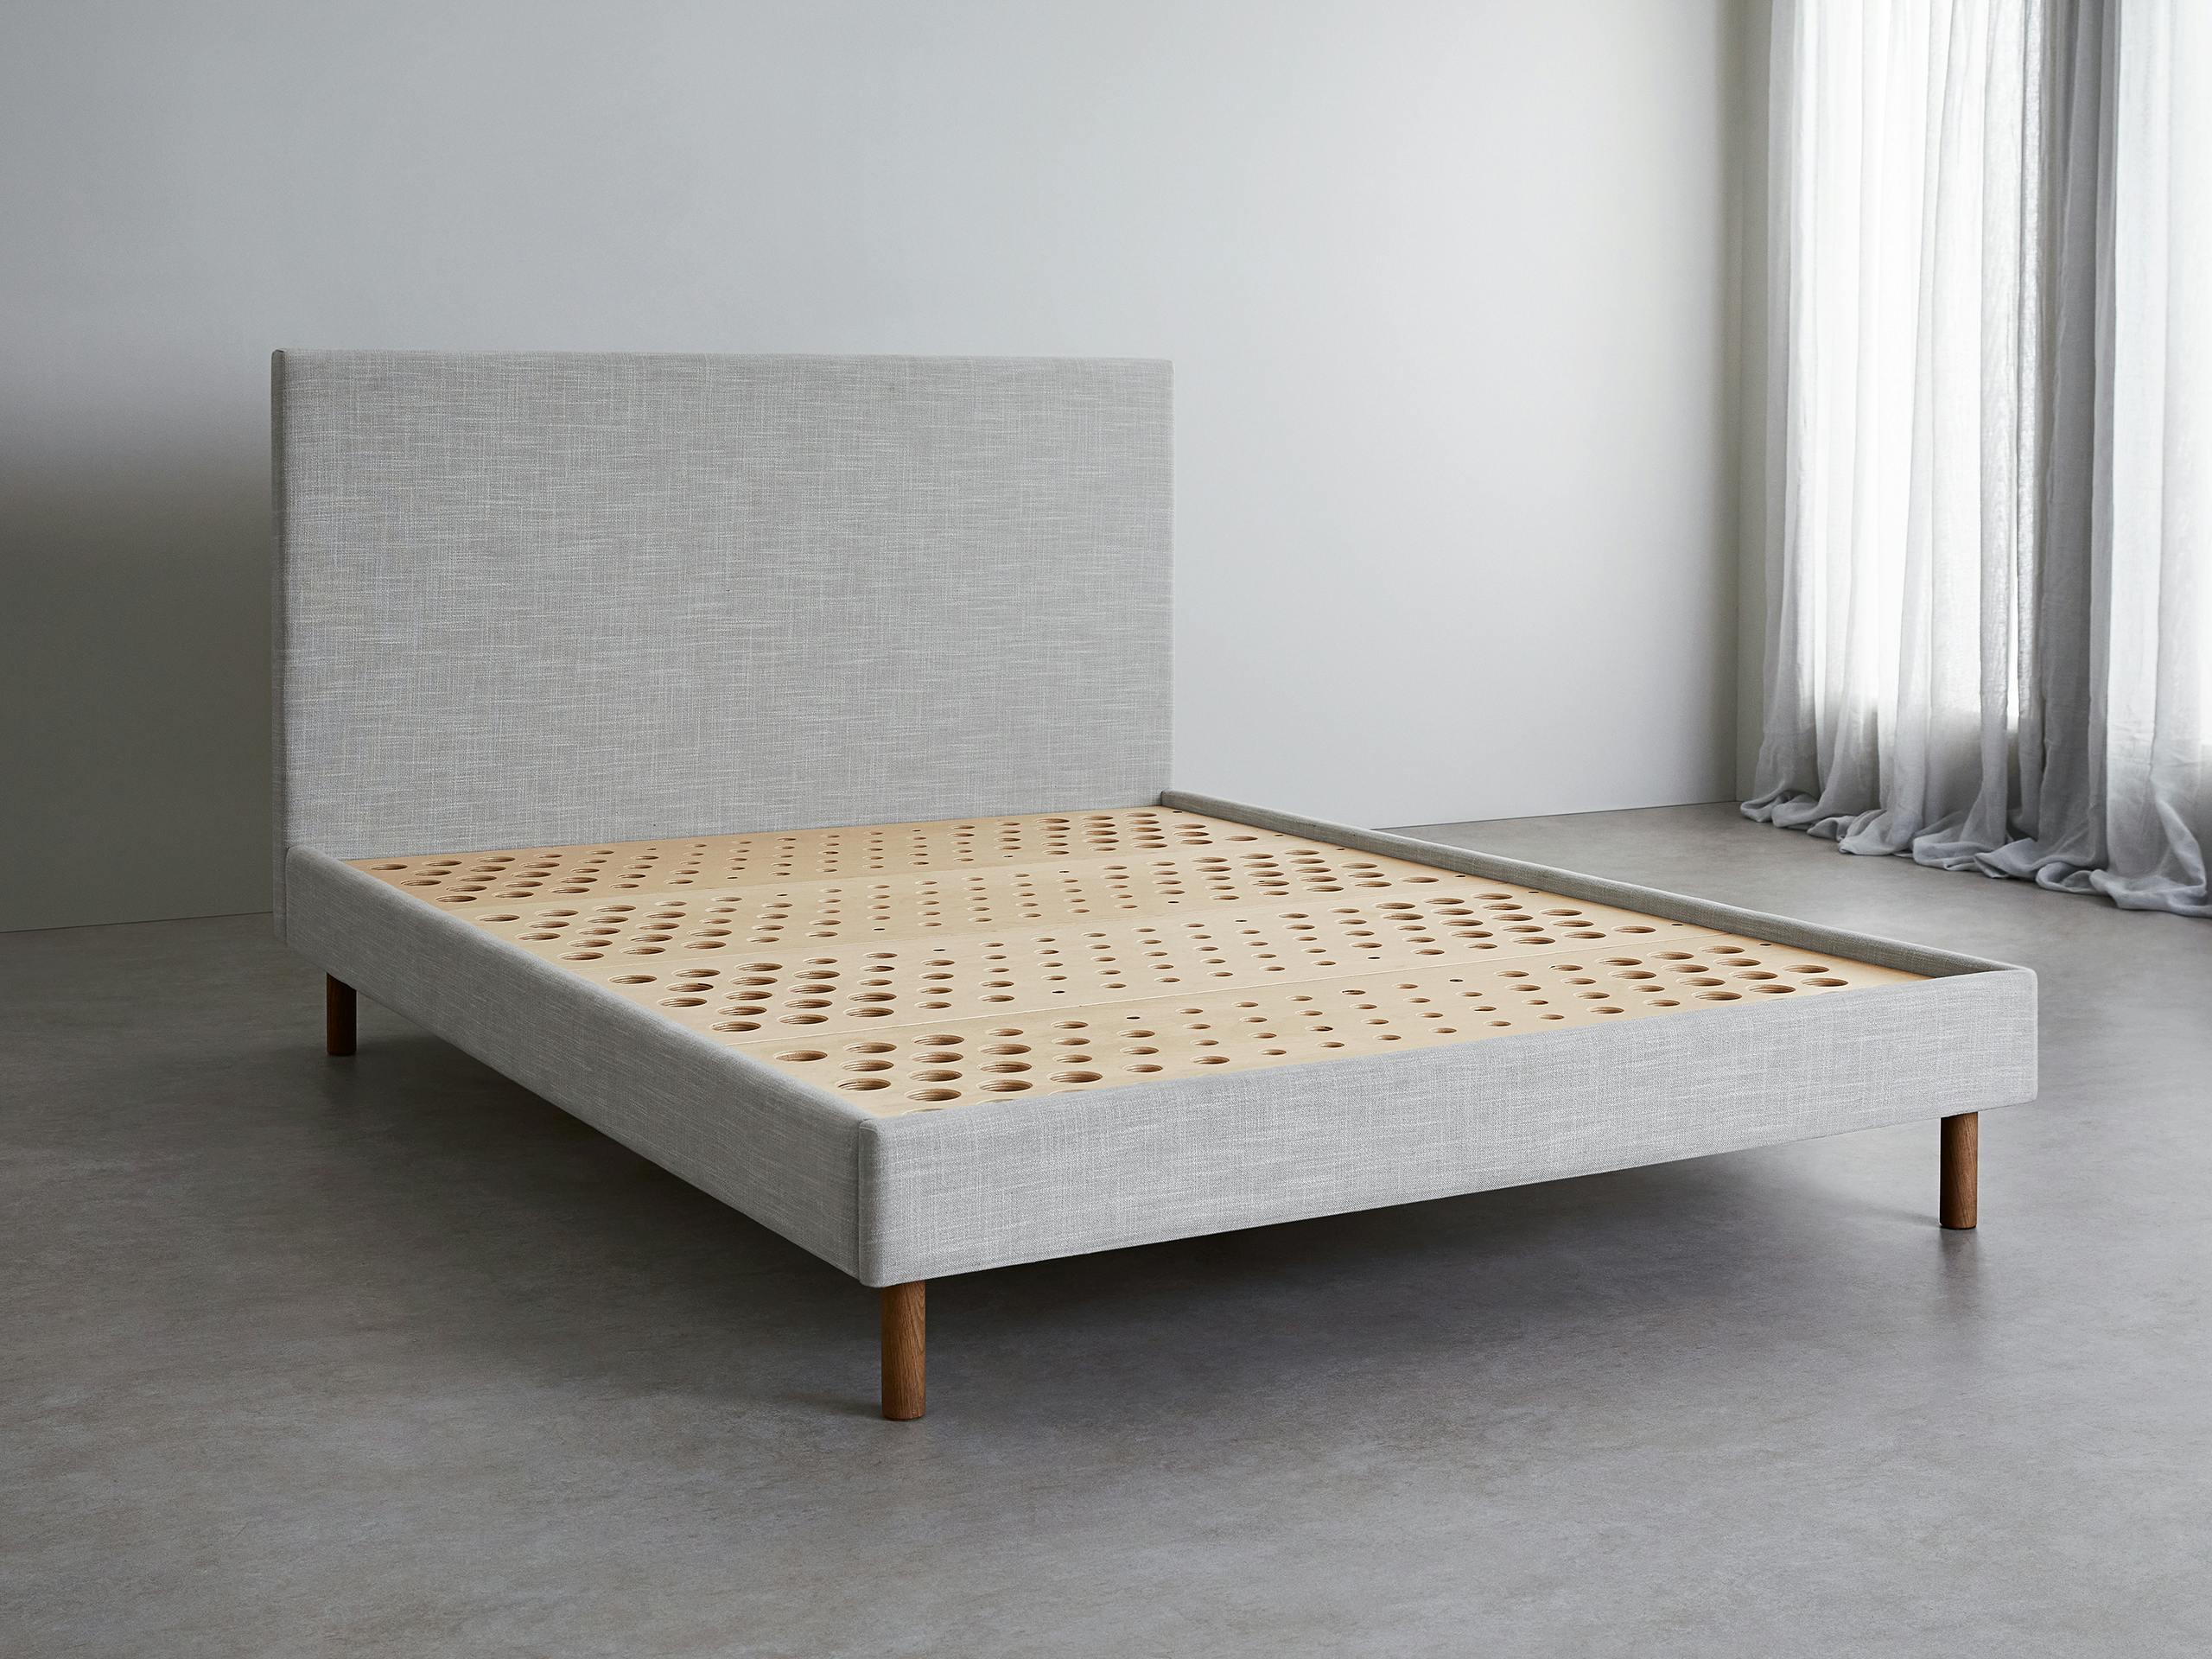 A light grey SD Indestruct Bed bed frame in a three quarter view.